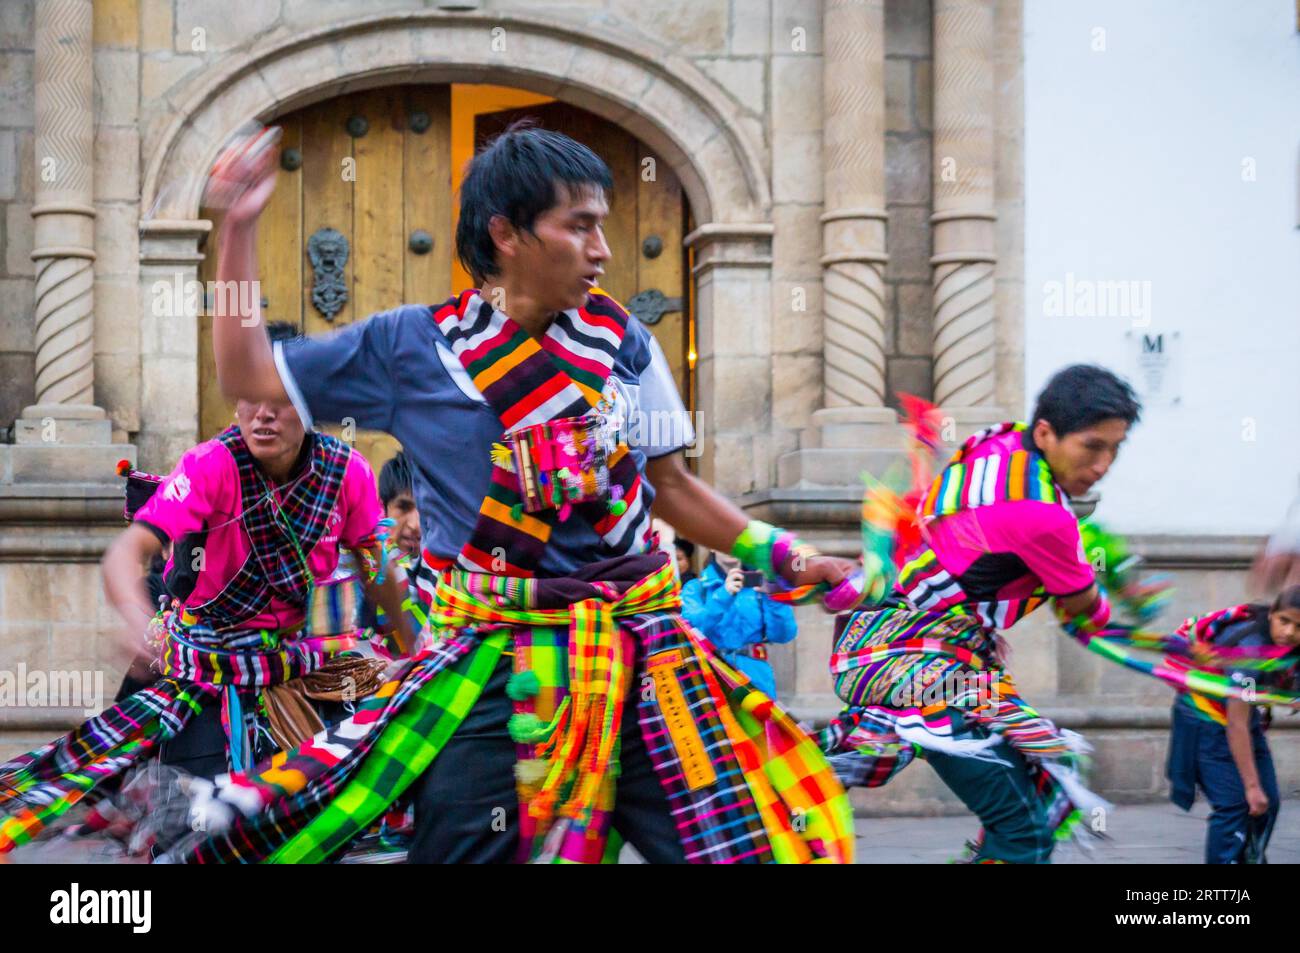 Sucre, Bolivia on September 5, 2015: Bolivian dancers in colorful costumes at Fiesta de la Virgen de Guadalupe in Sucre in front of Cathedral gate Stock Photo